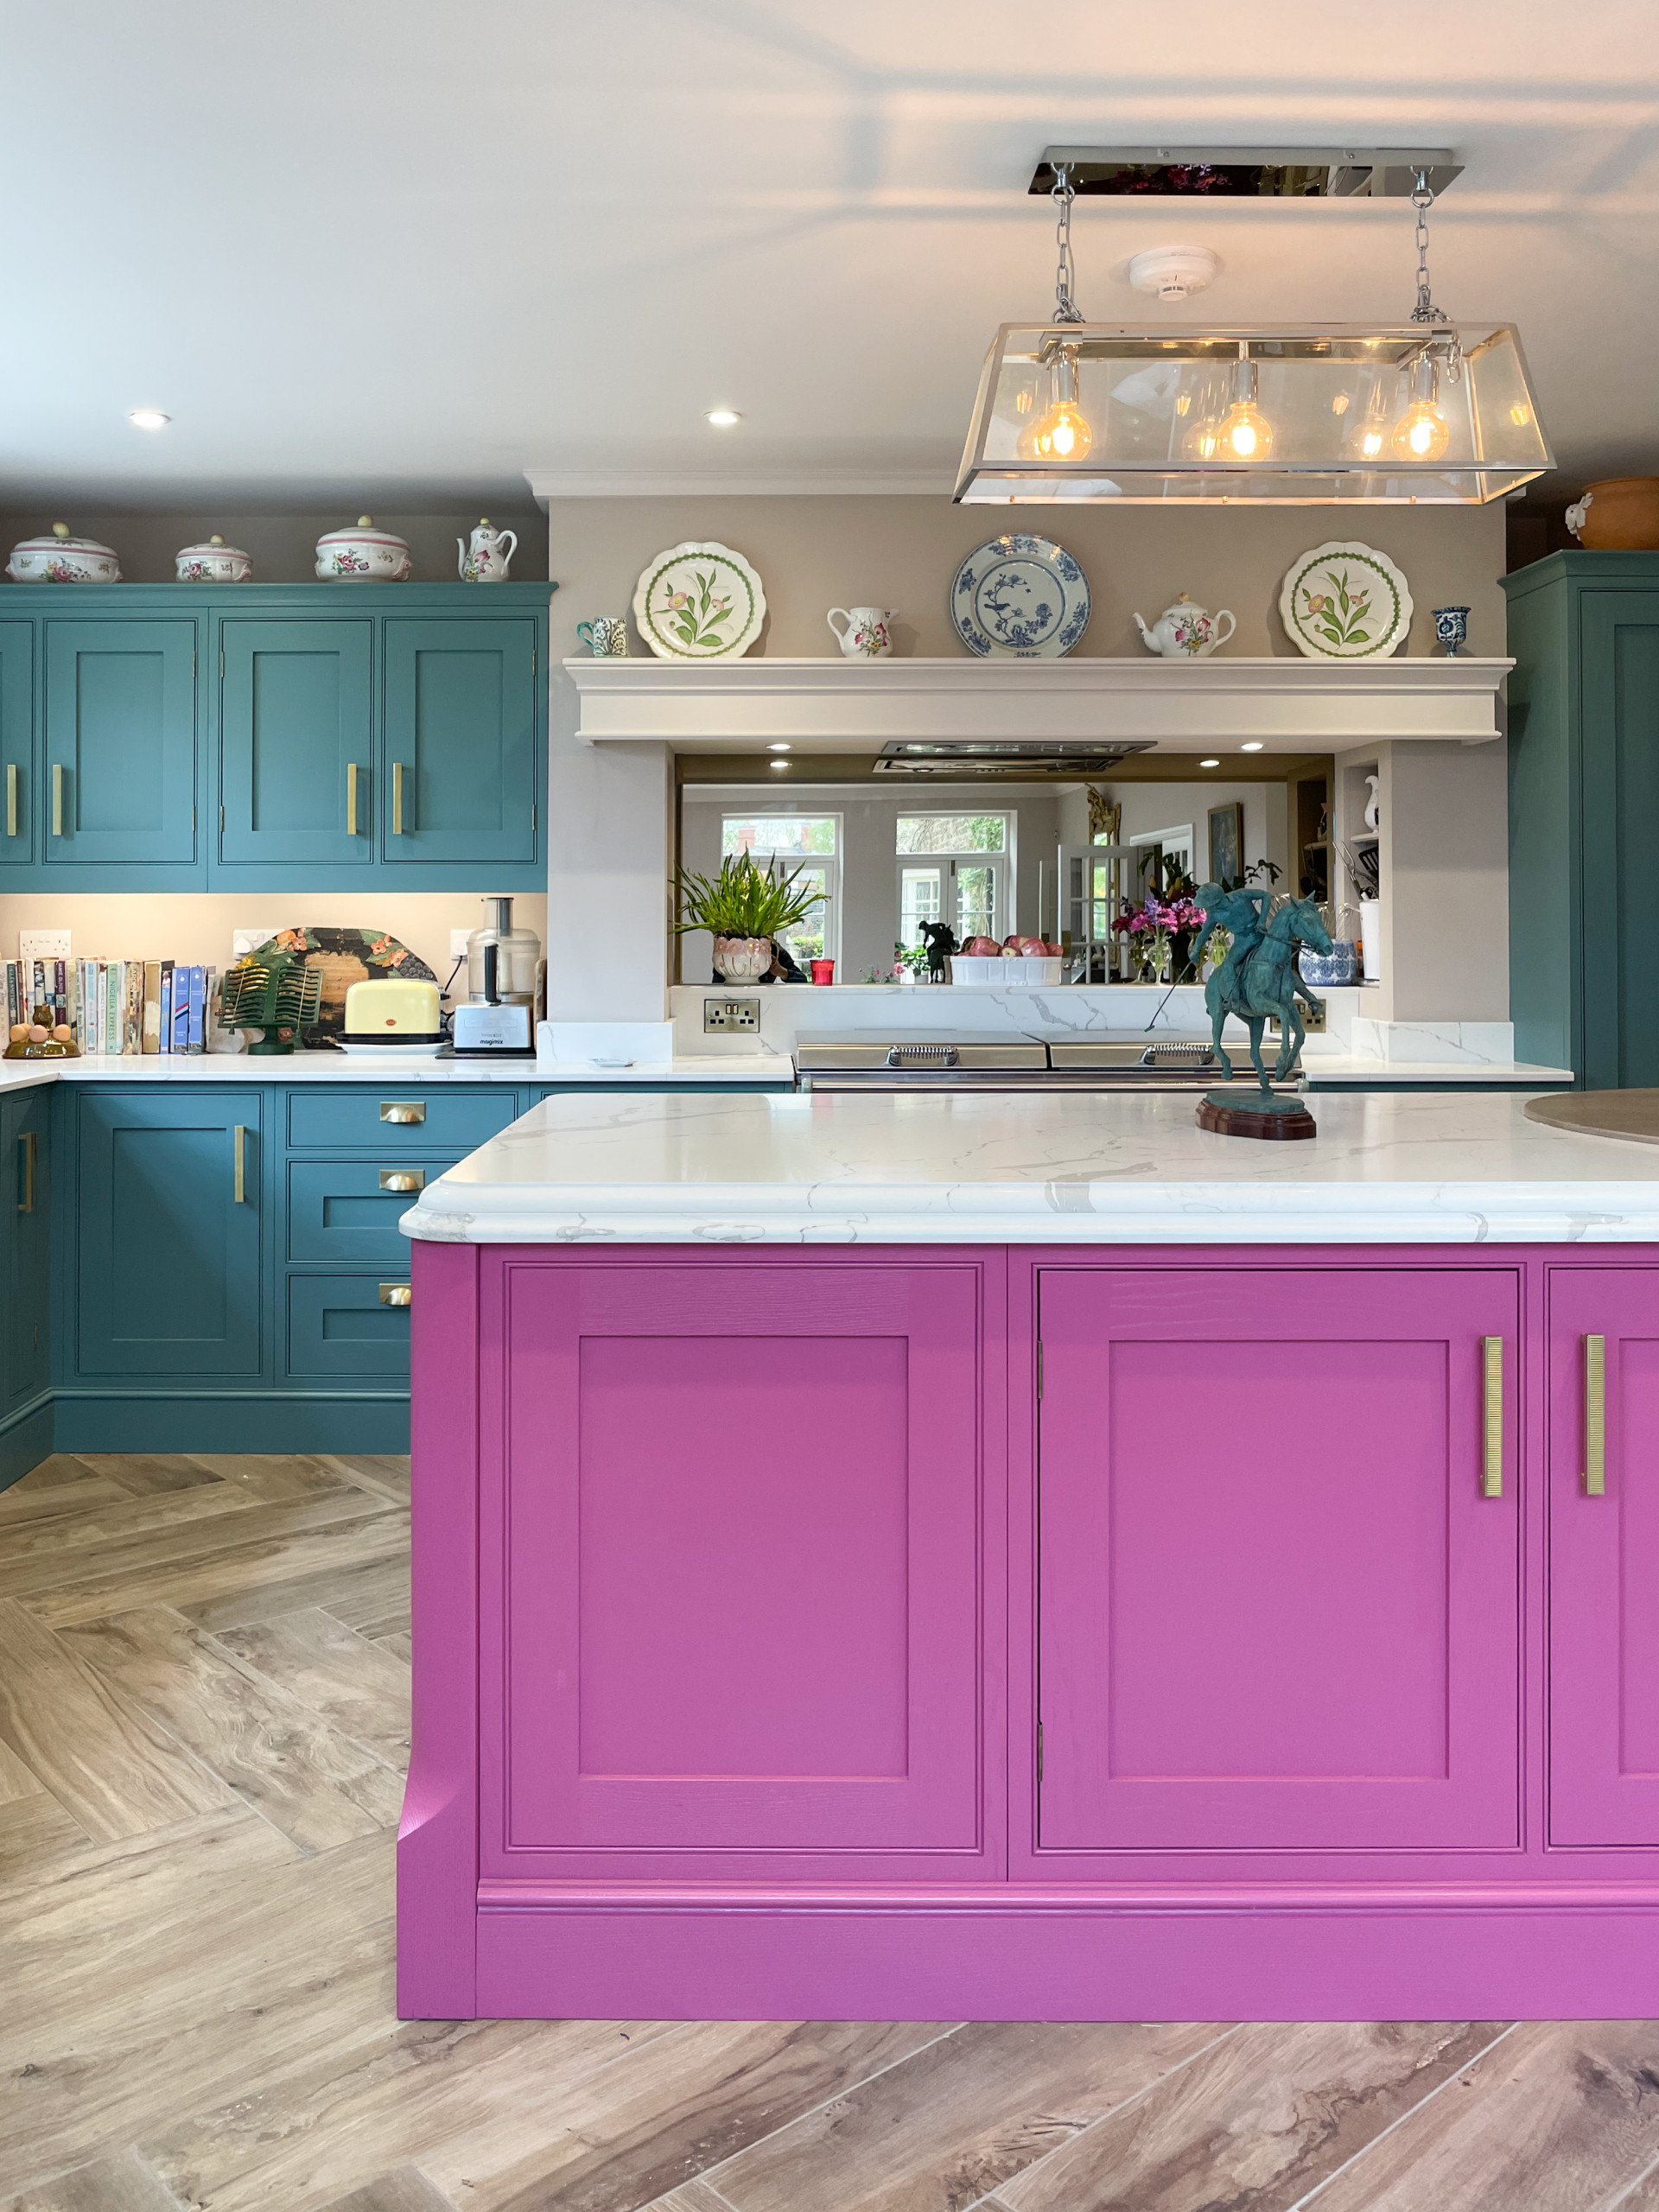 36 Purple Kitchen Decor Ideas That Stand Out - Shelterness